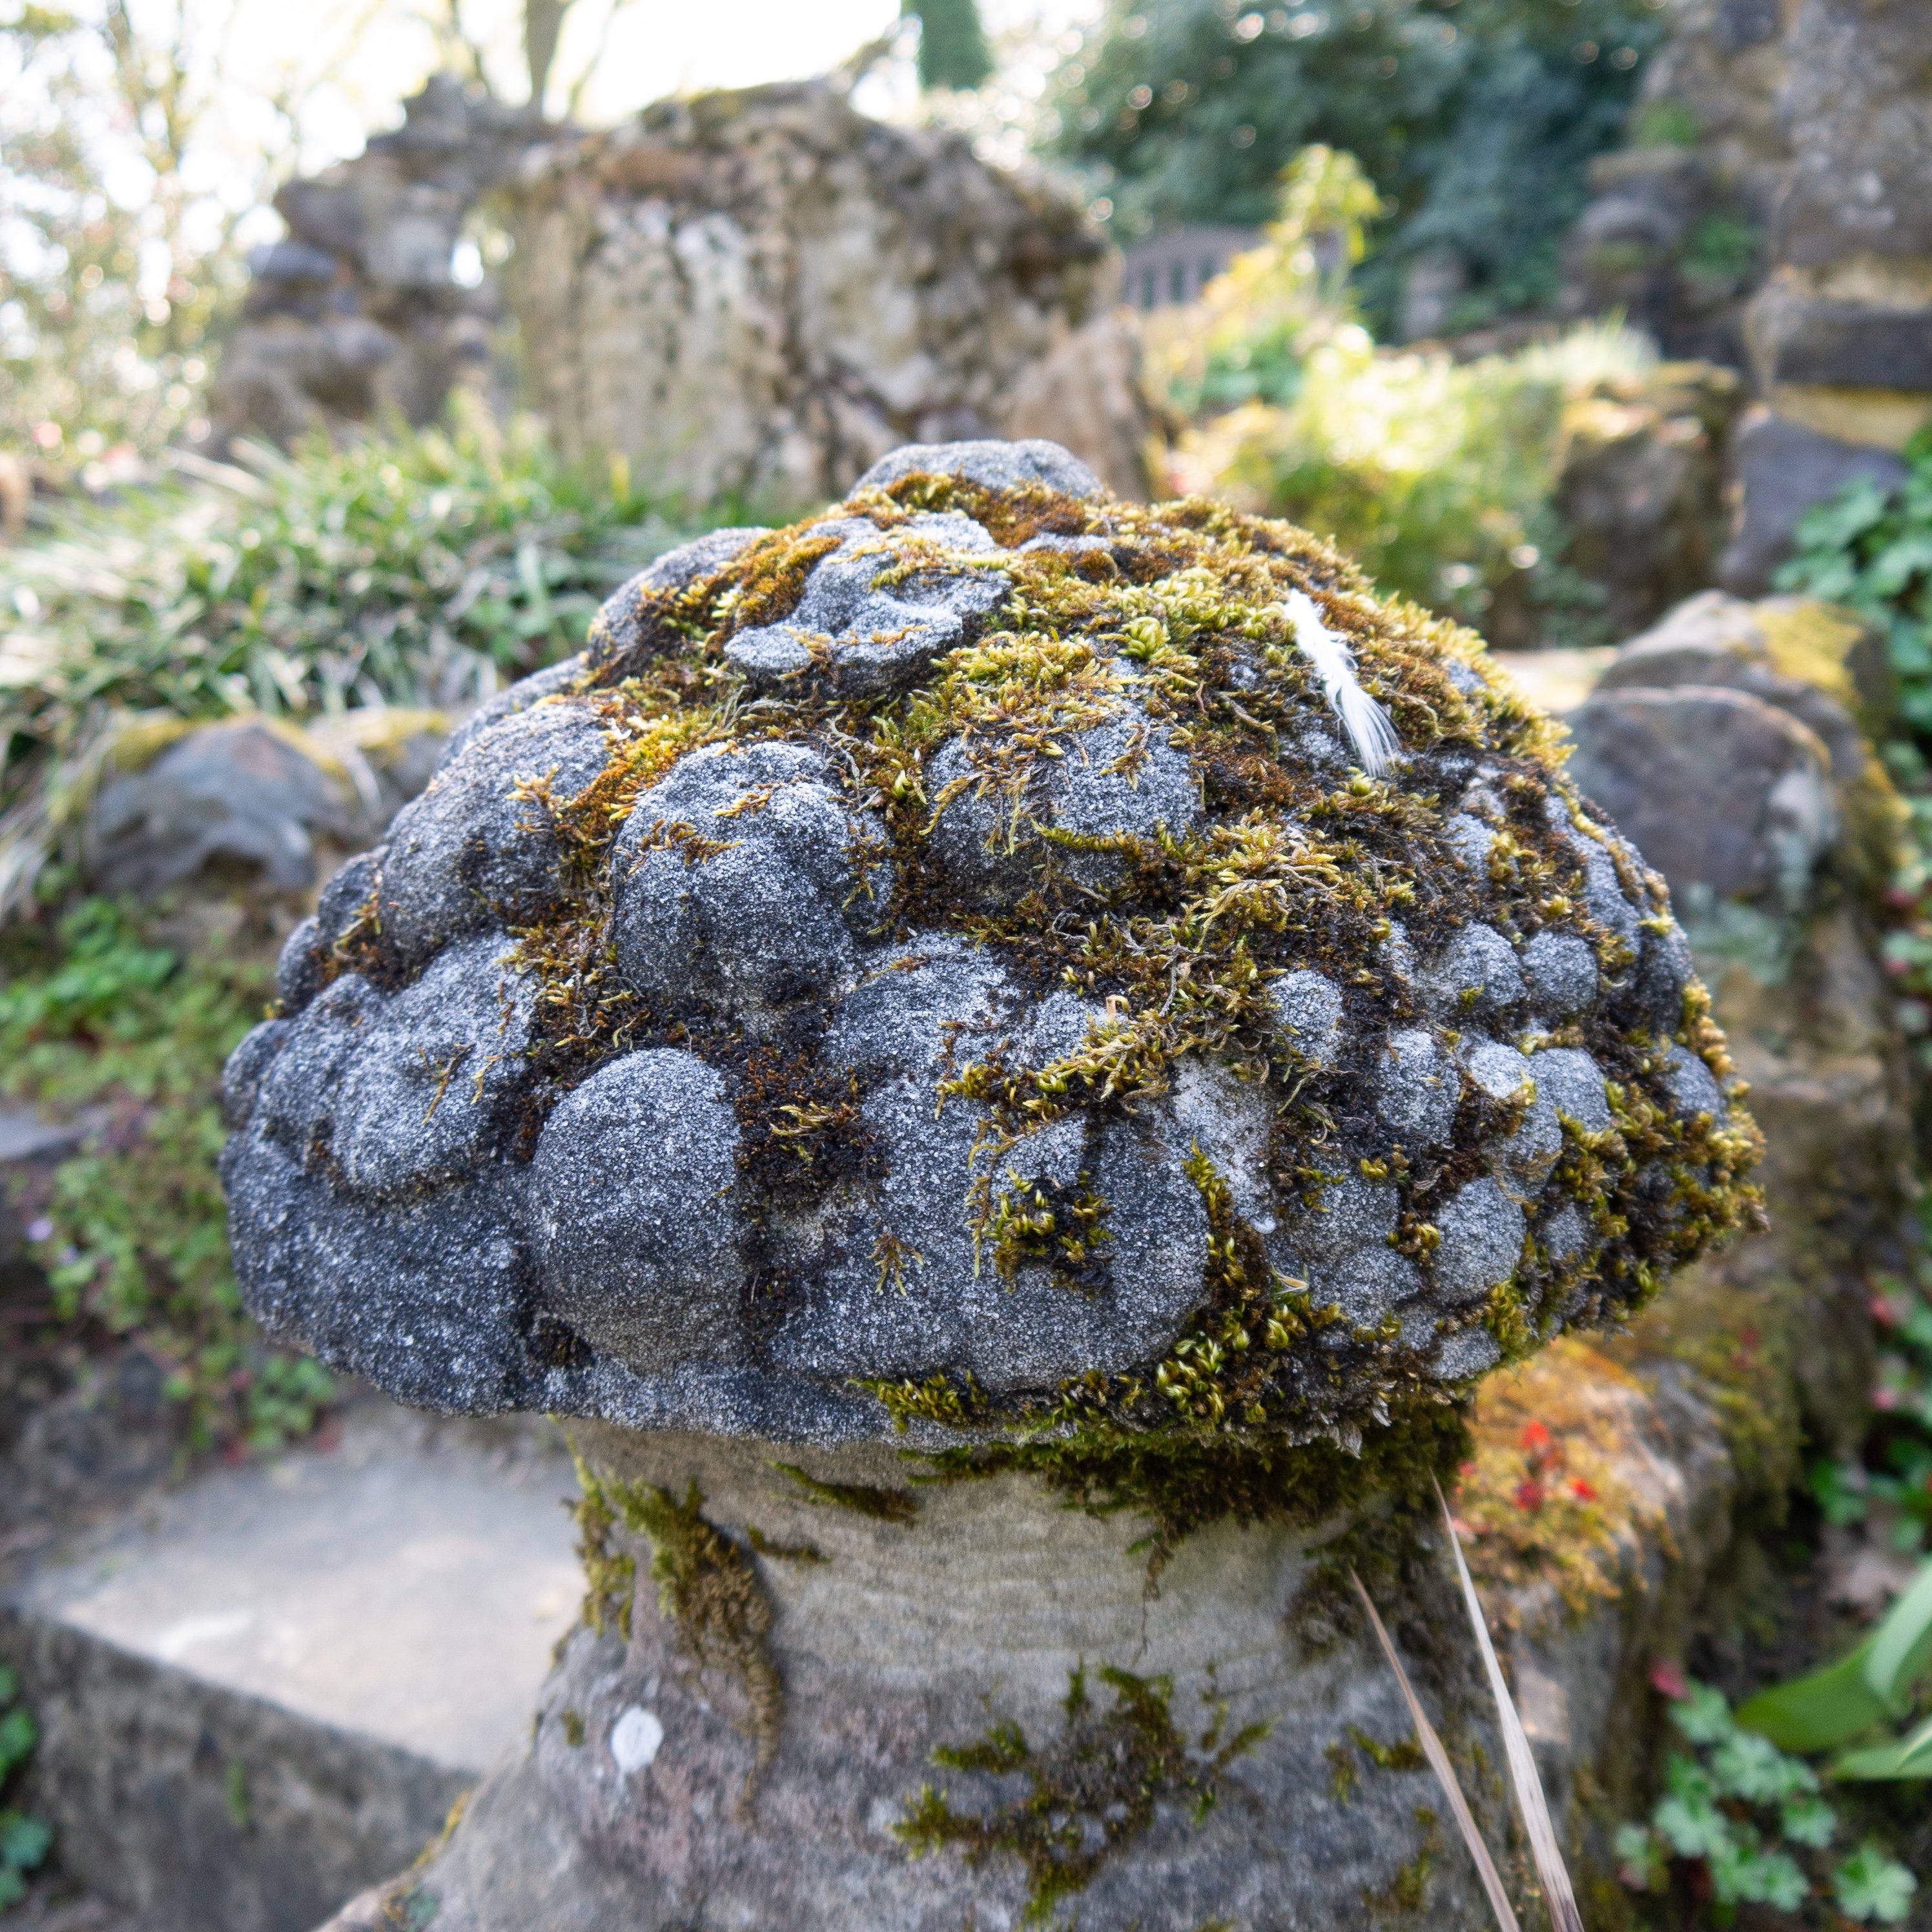 Aged Cast Stone Mushroom Garden Ornament with moss and lichen growing on it